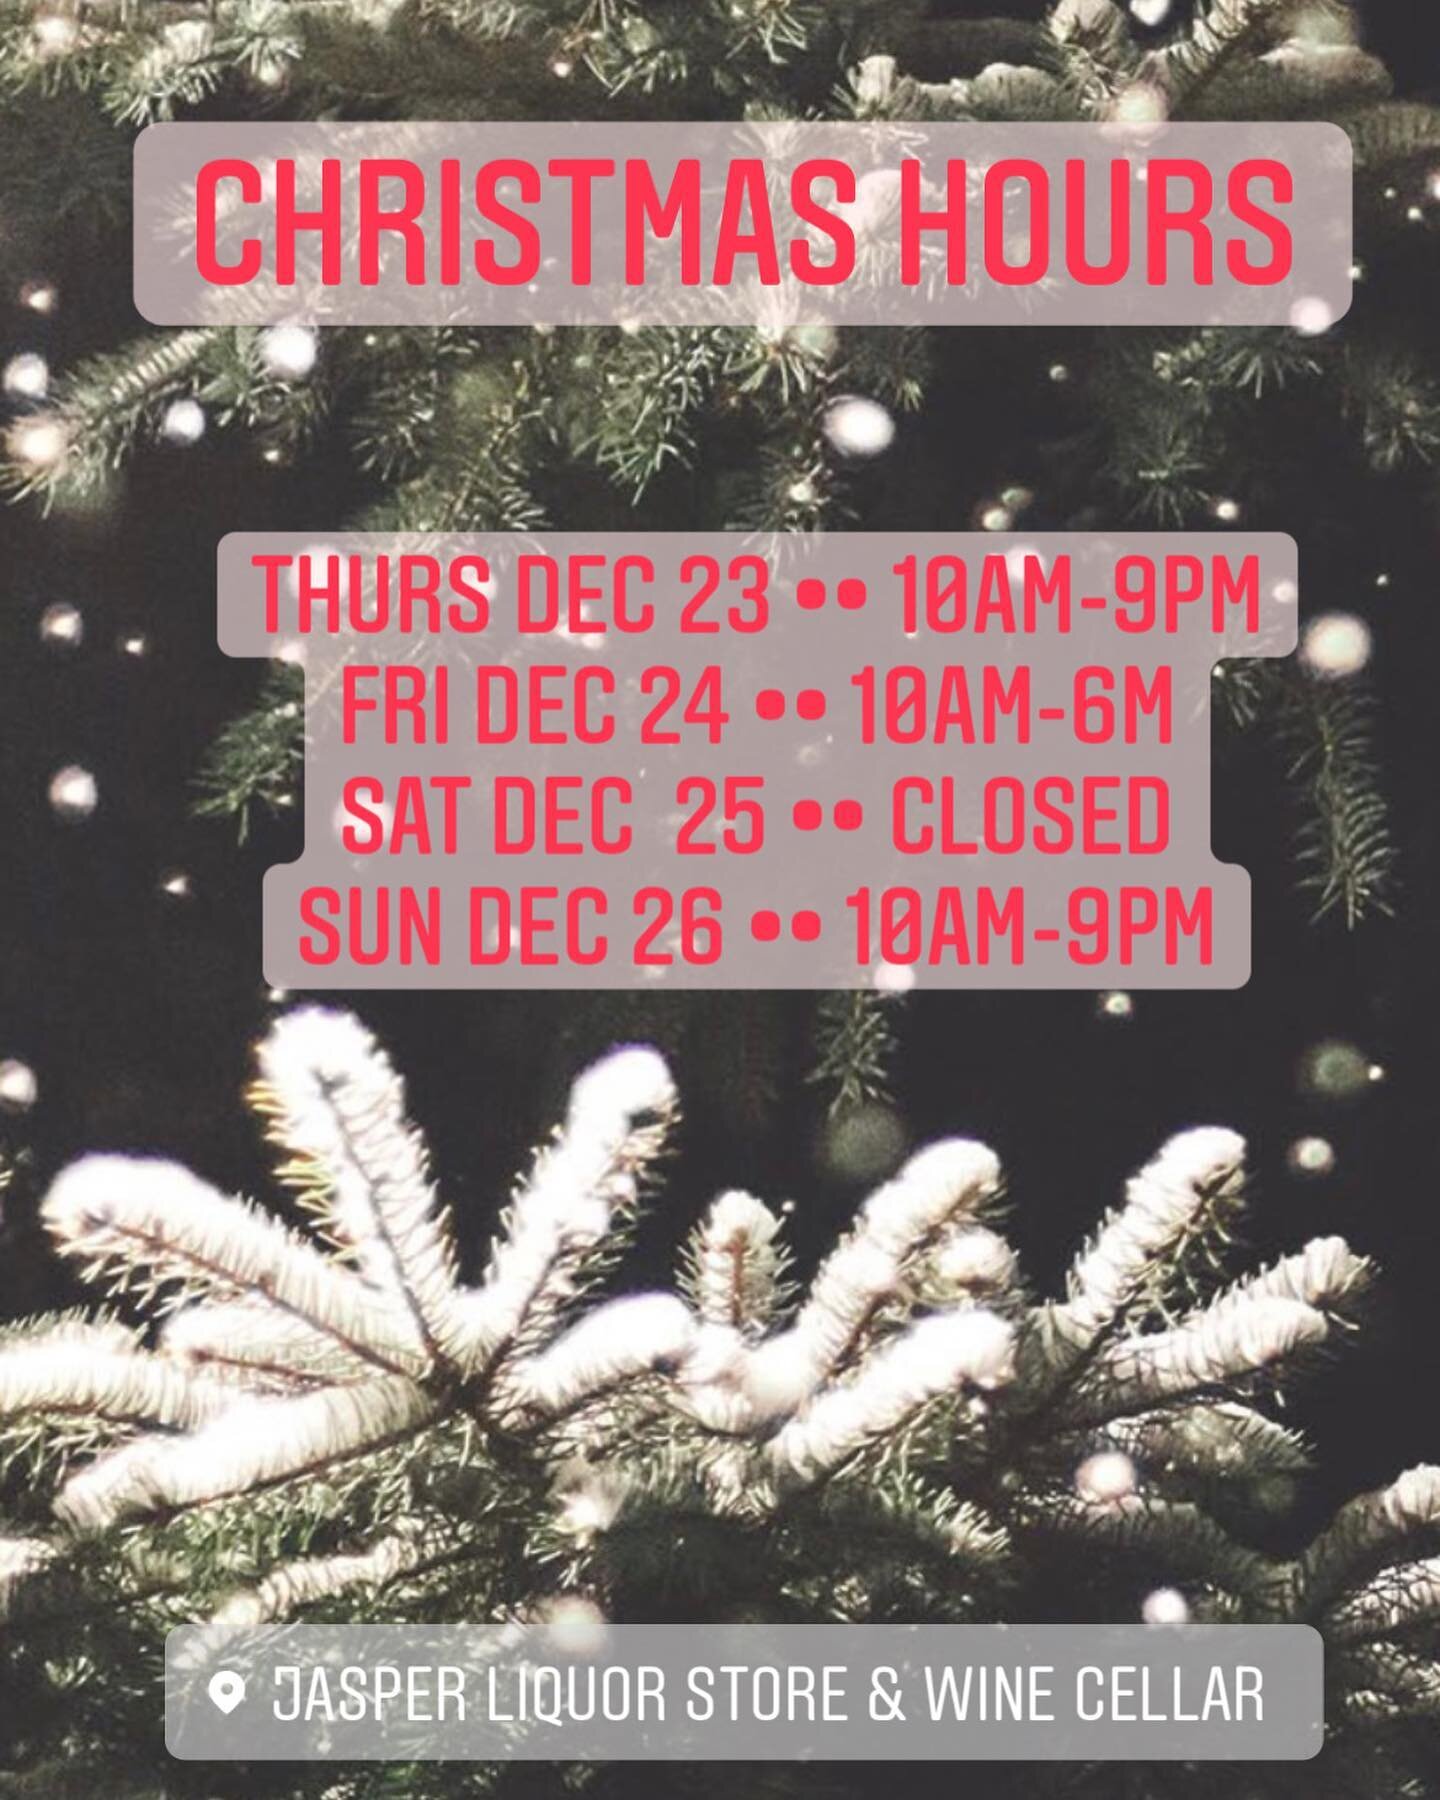 ✨A reminder for all our customers! ✨ 🎄#cheers #merrychristmas #jasperliquorstore #staysafe #hopesantafindsyou #shoplocal #myjasper